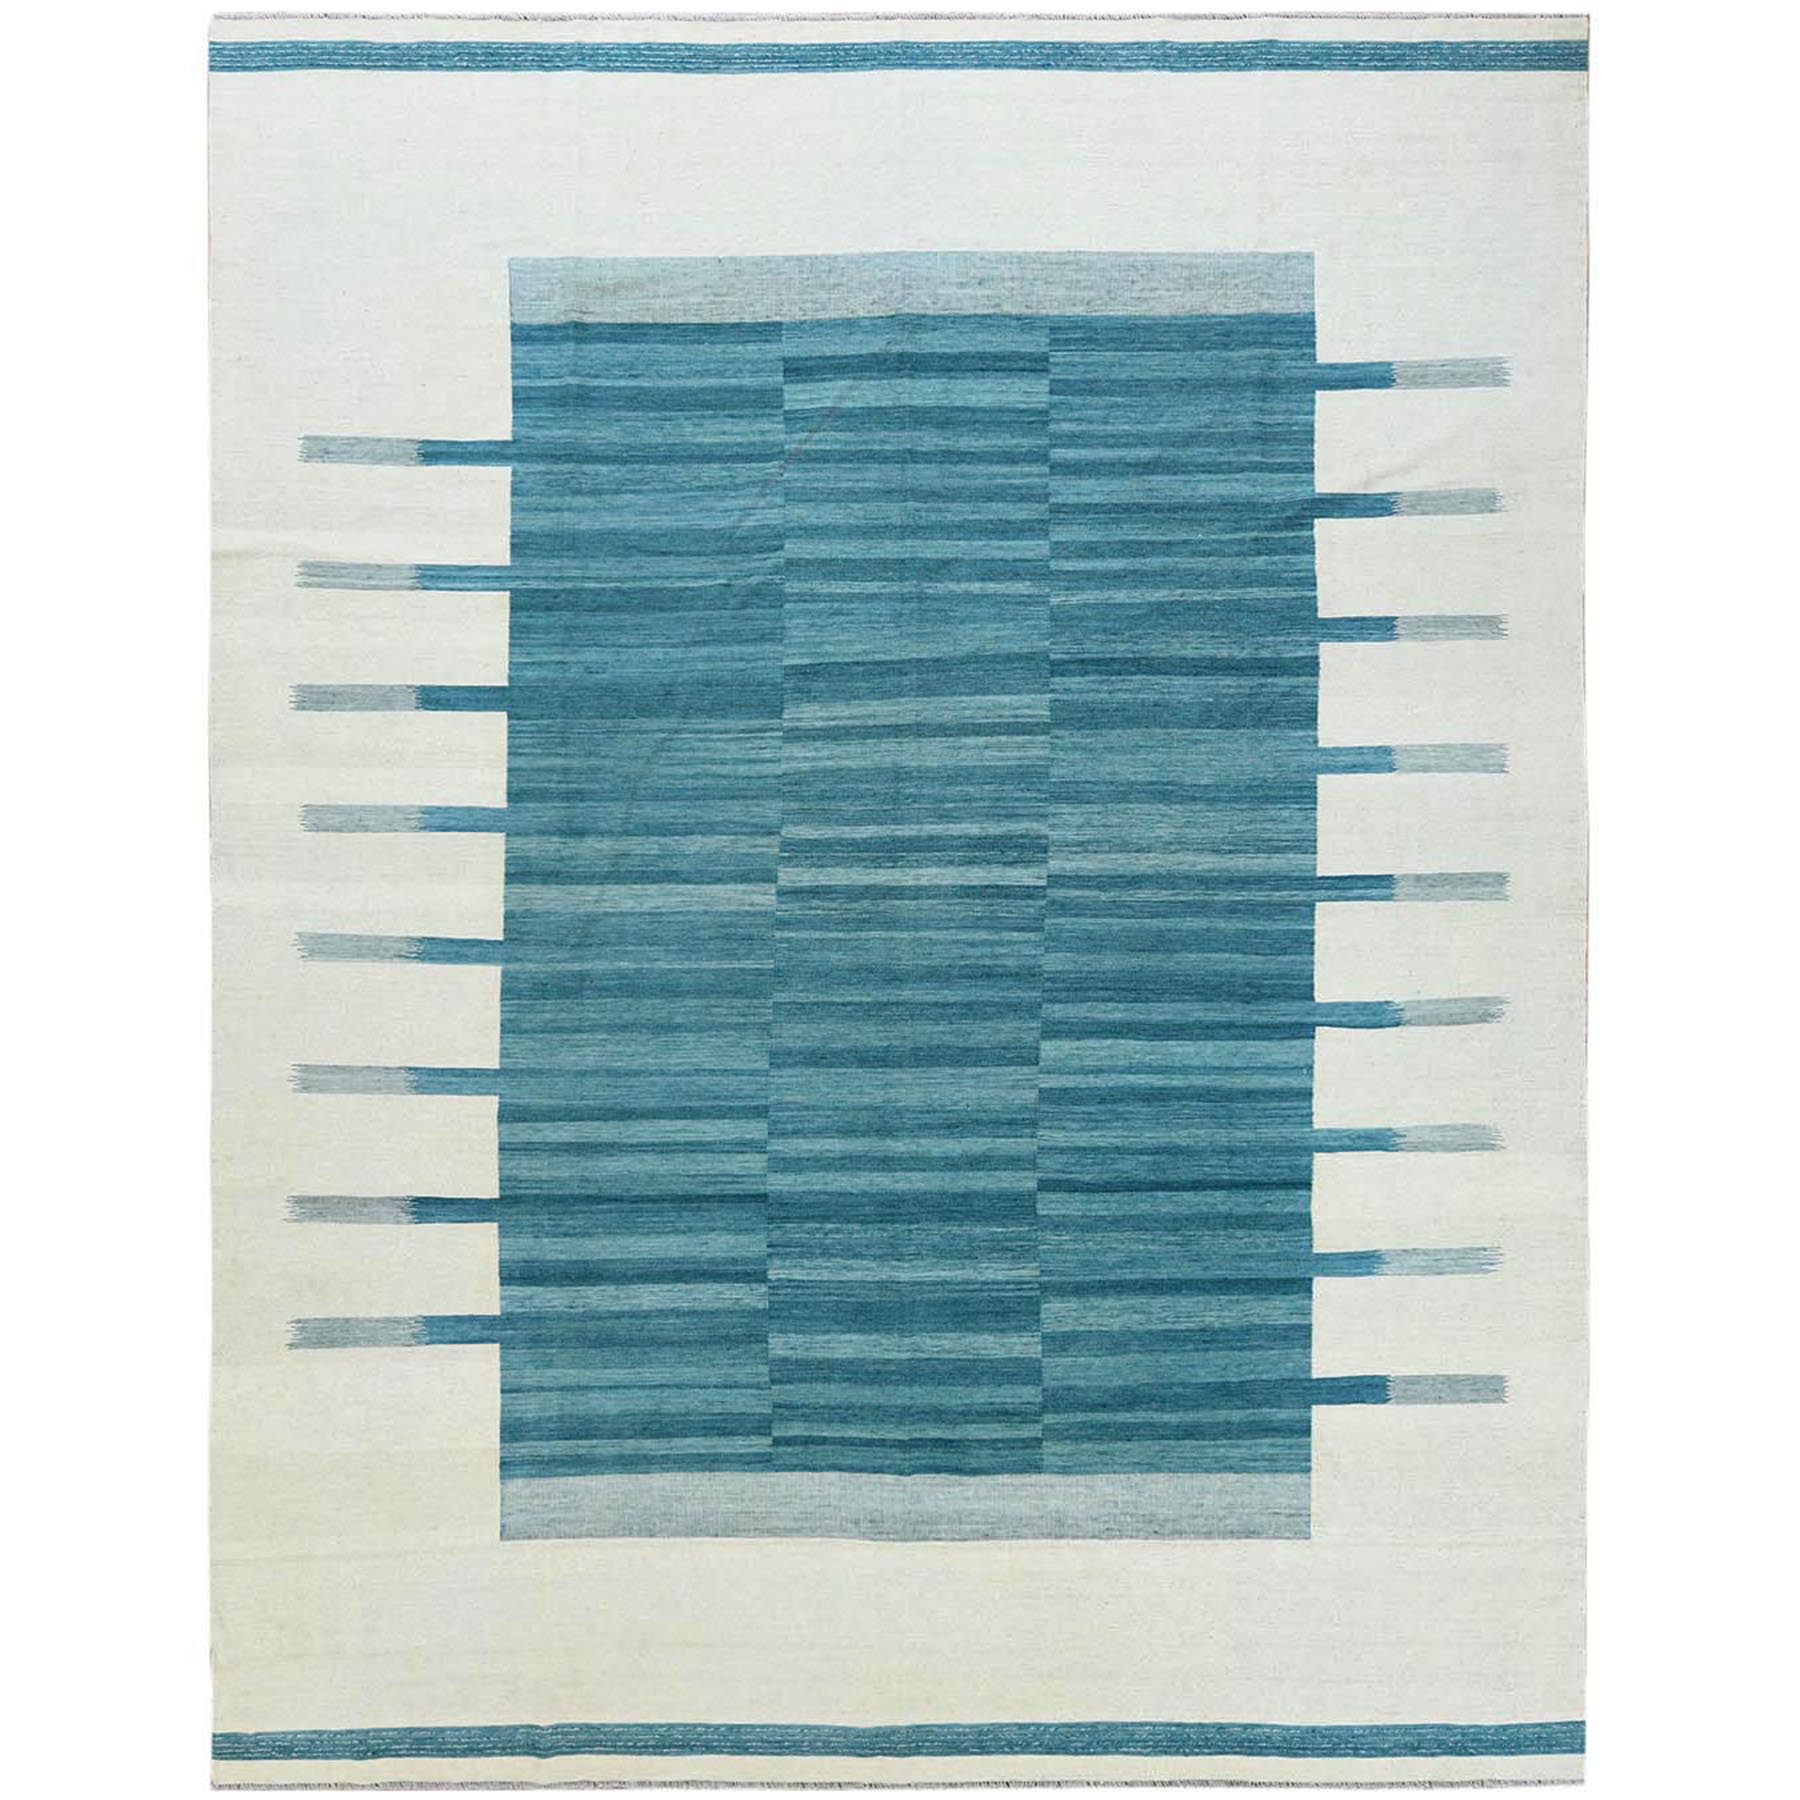 Modern & Contemporary Wool Hand-Woven Area Rug 10'8